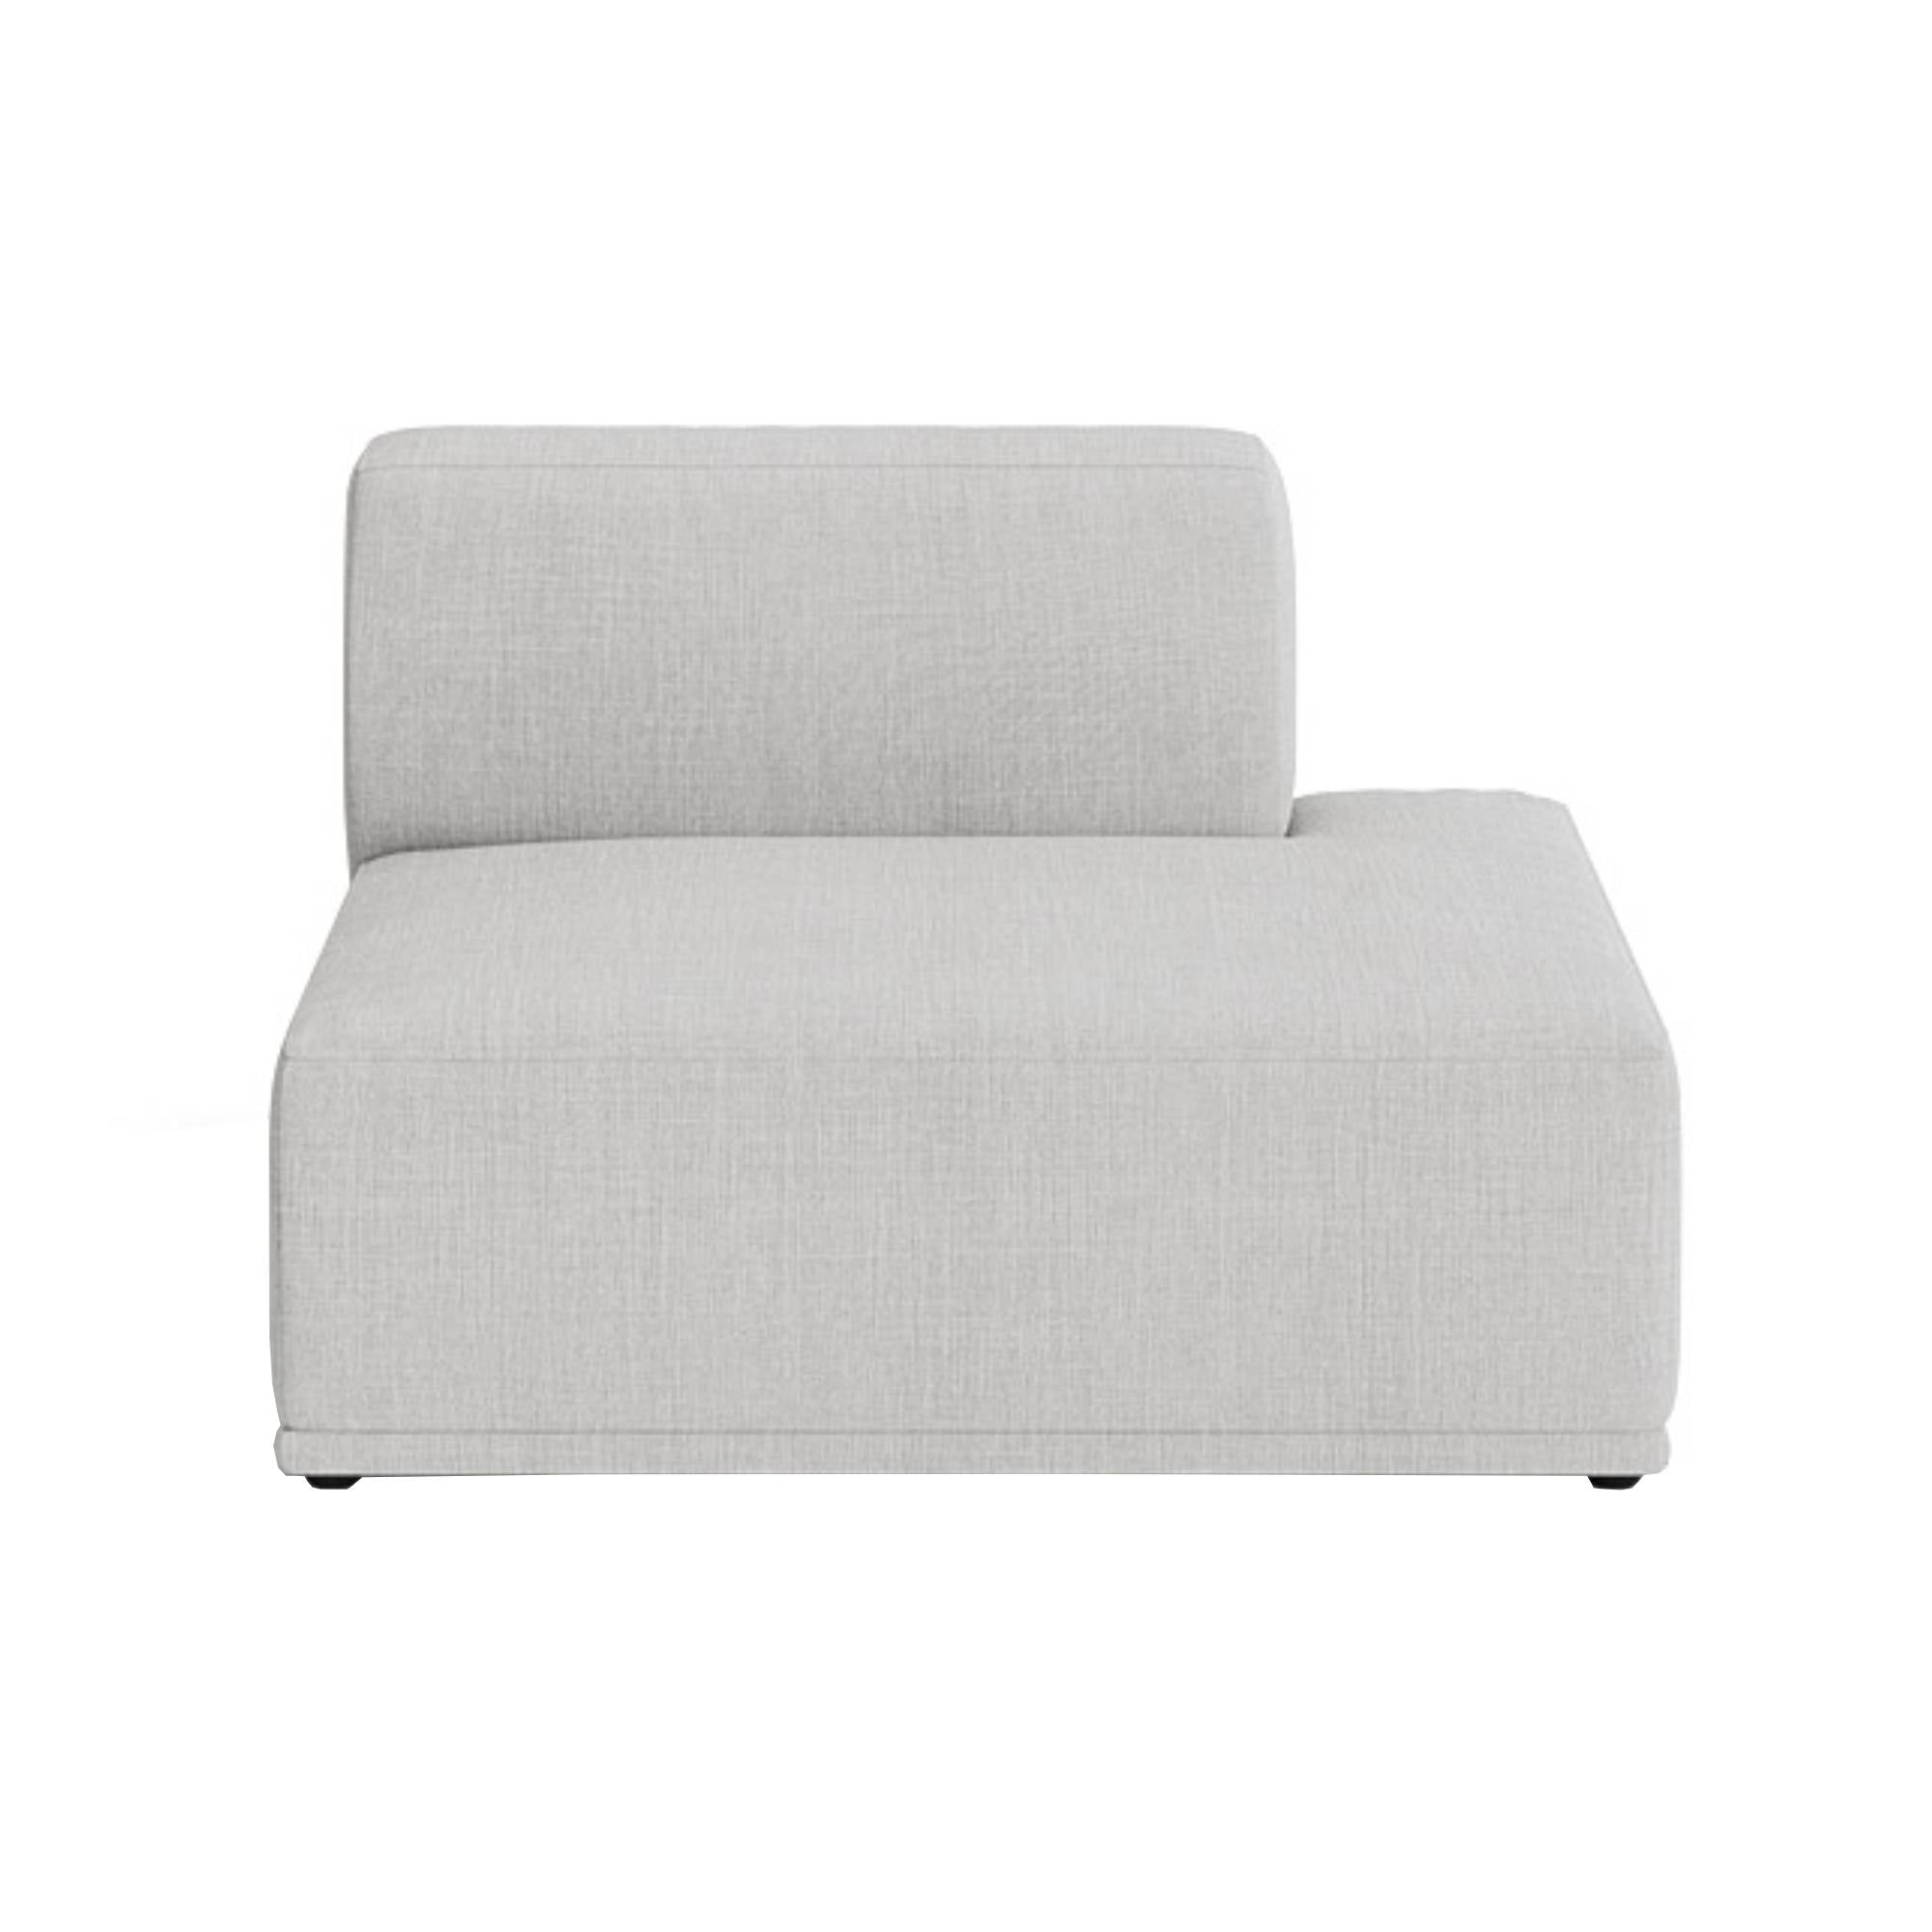 Connect Soft Sofa Modules: Right Open Ended